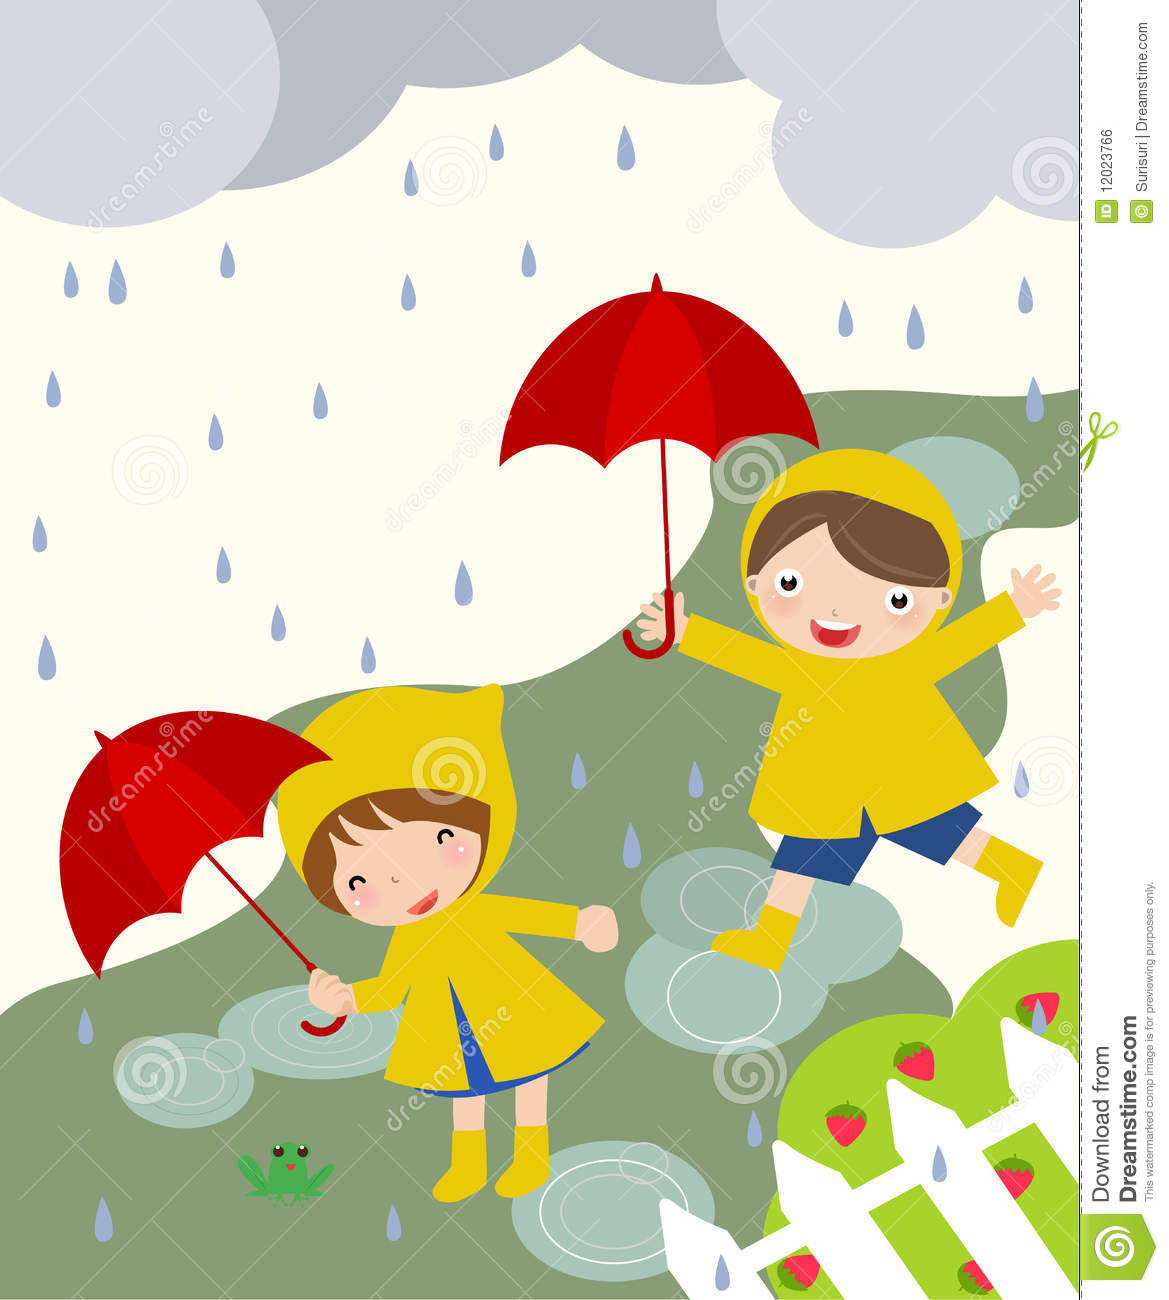 Cute Kids Playing In The Rain Royalty Free Stock Image   Image    